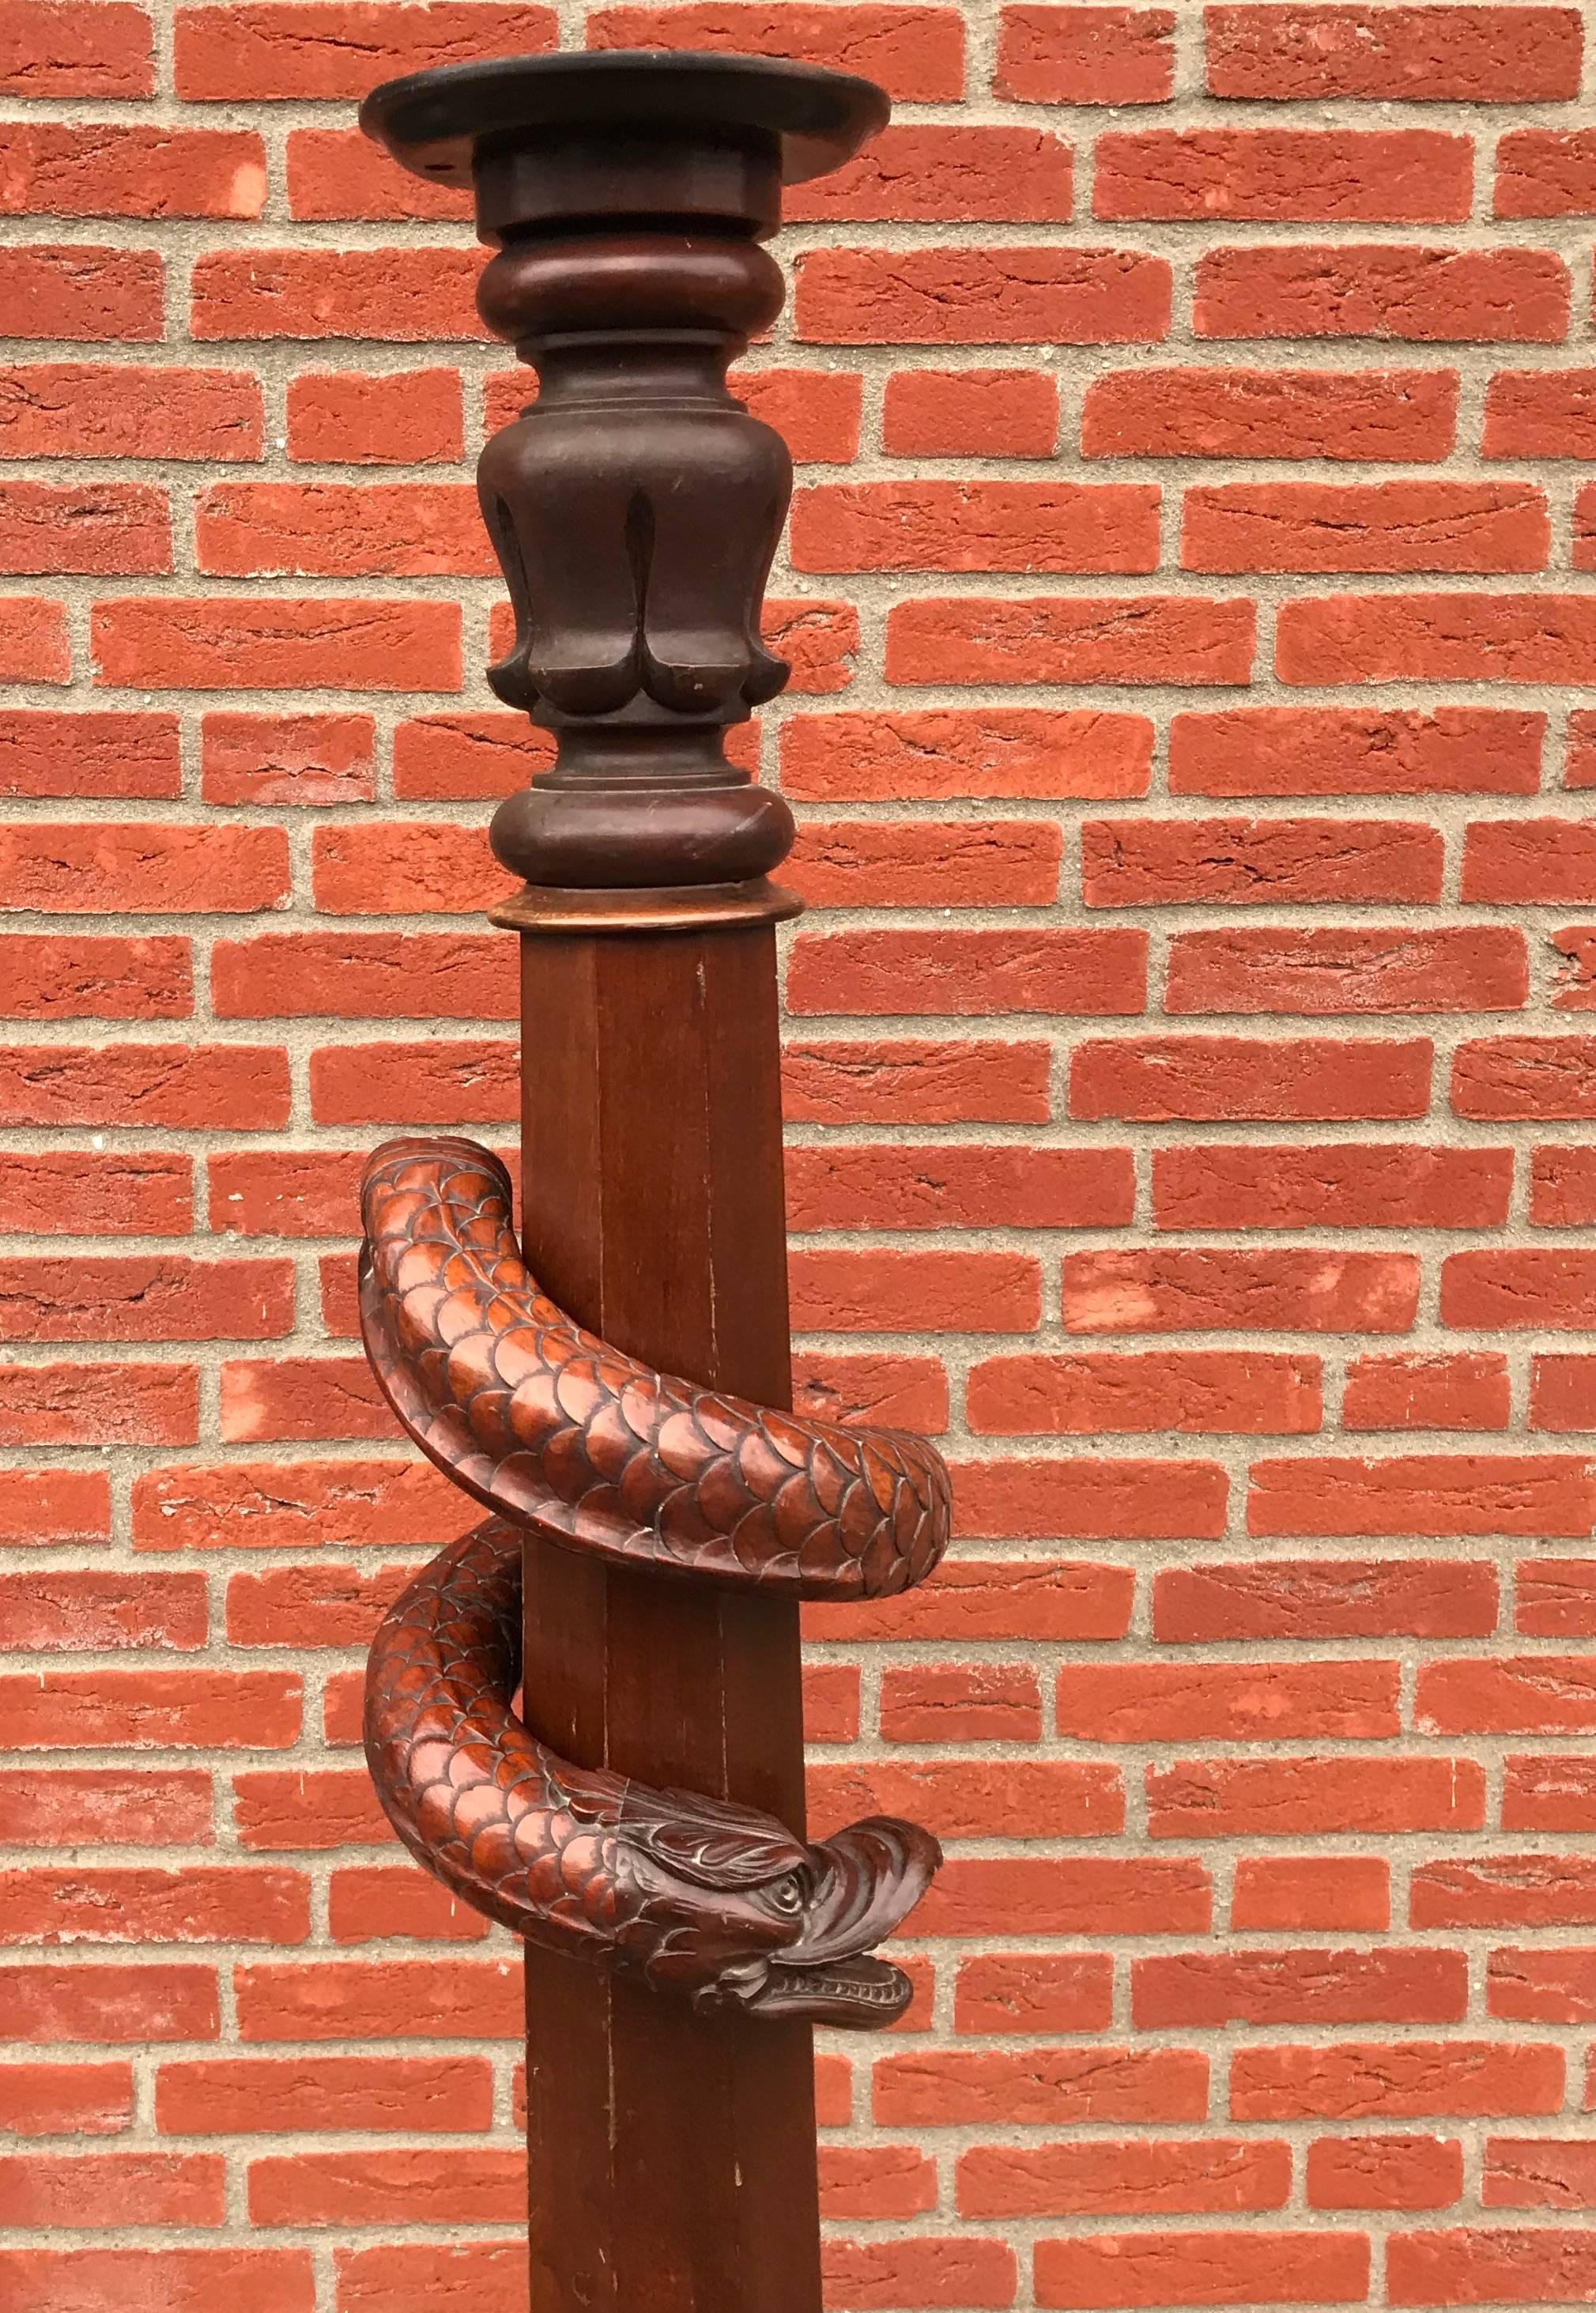 One of a kind, sculptural stair newel post from the 1800s.

This unique home accessorie can only and exclusively have been hand-crafted for a 19th century mansion or public building and we think it is of German origin. This stair newel post is